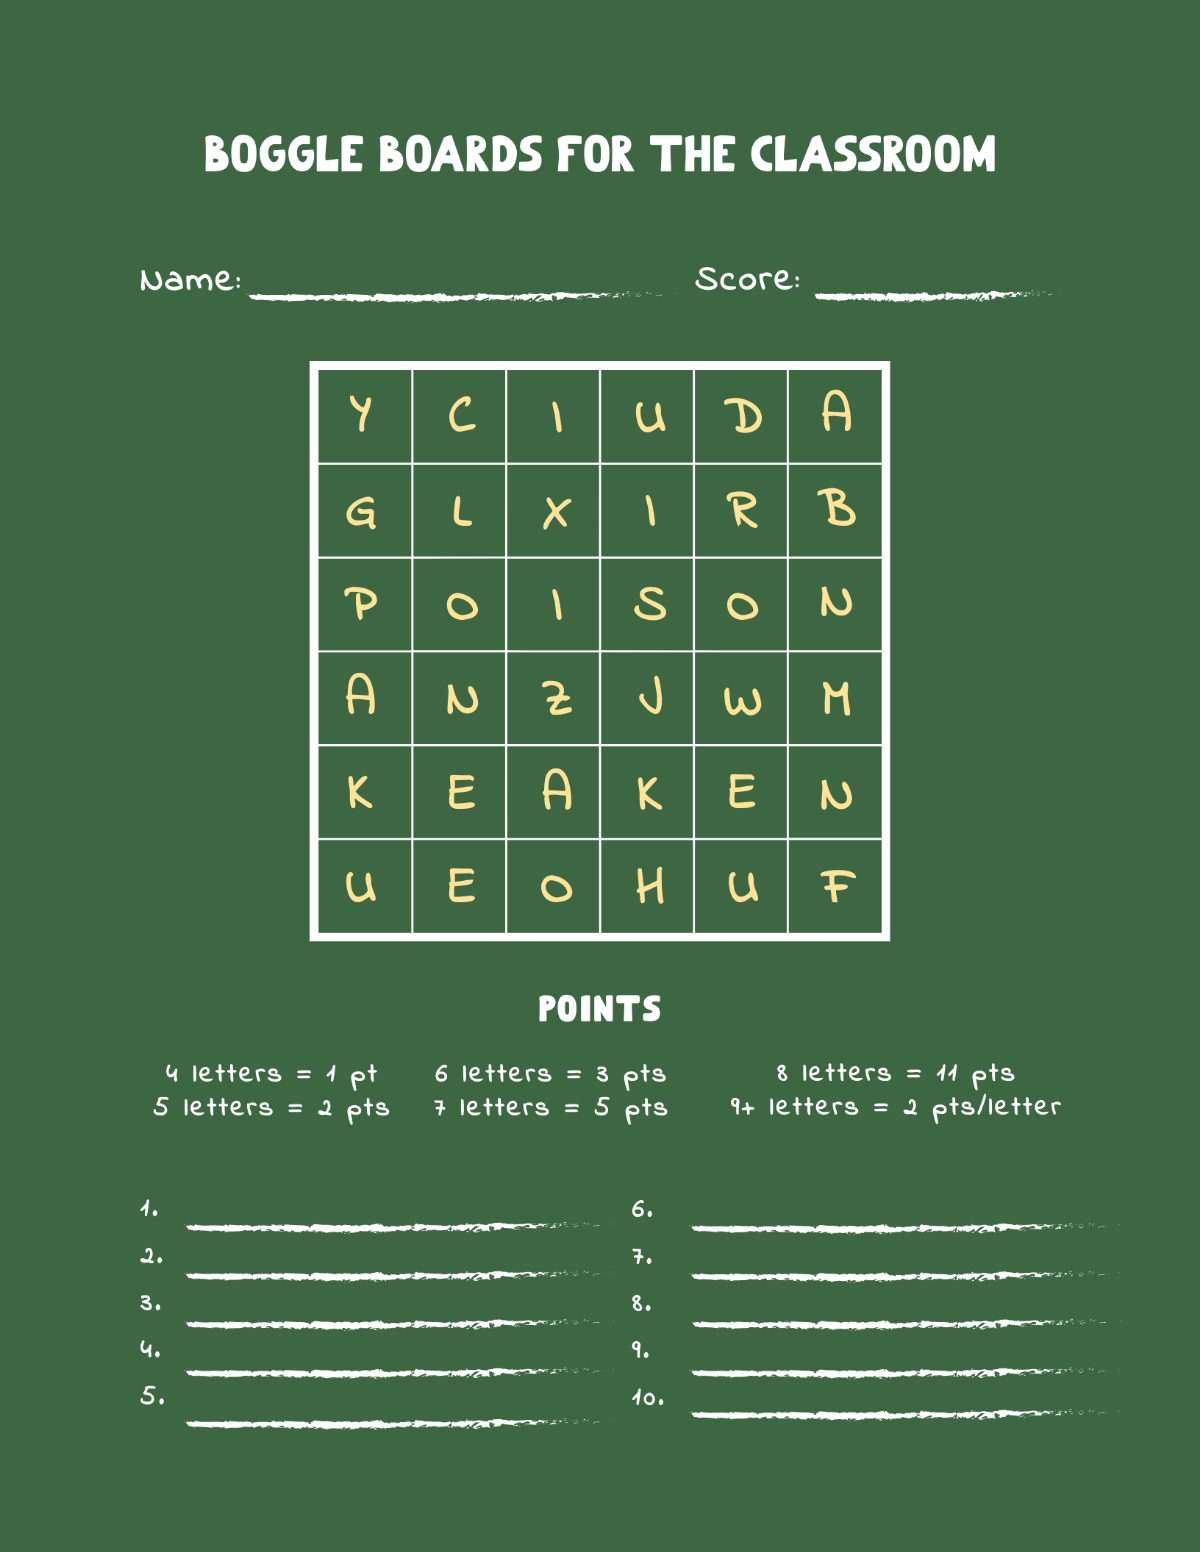 Free Boggle Boards For The Classroom Template